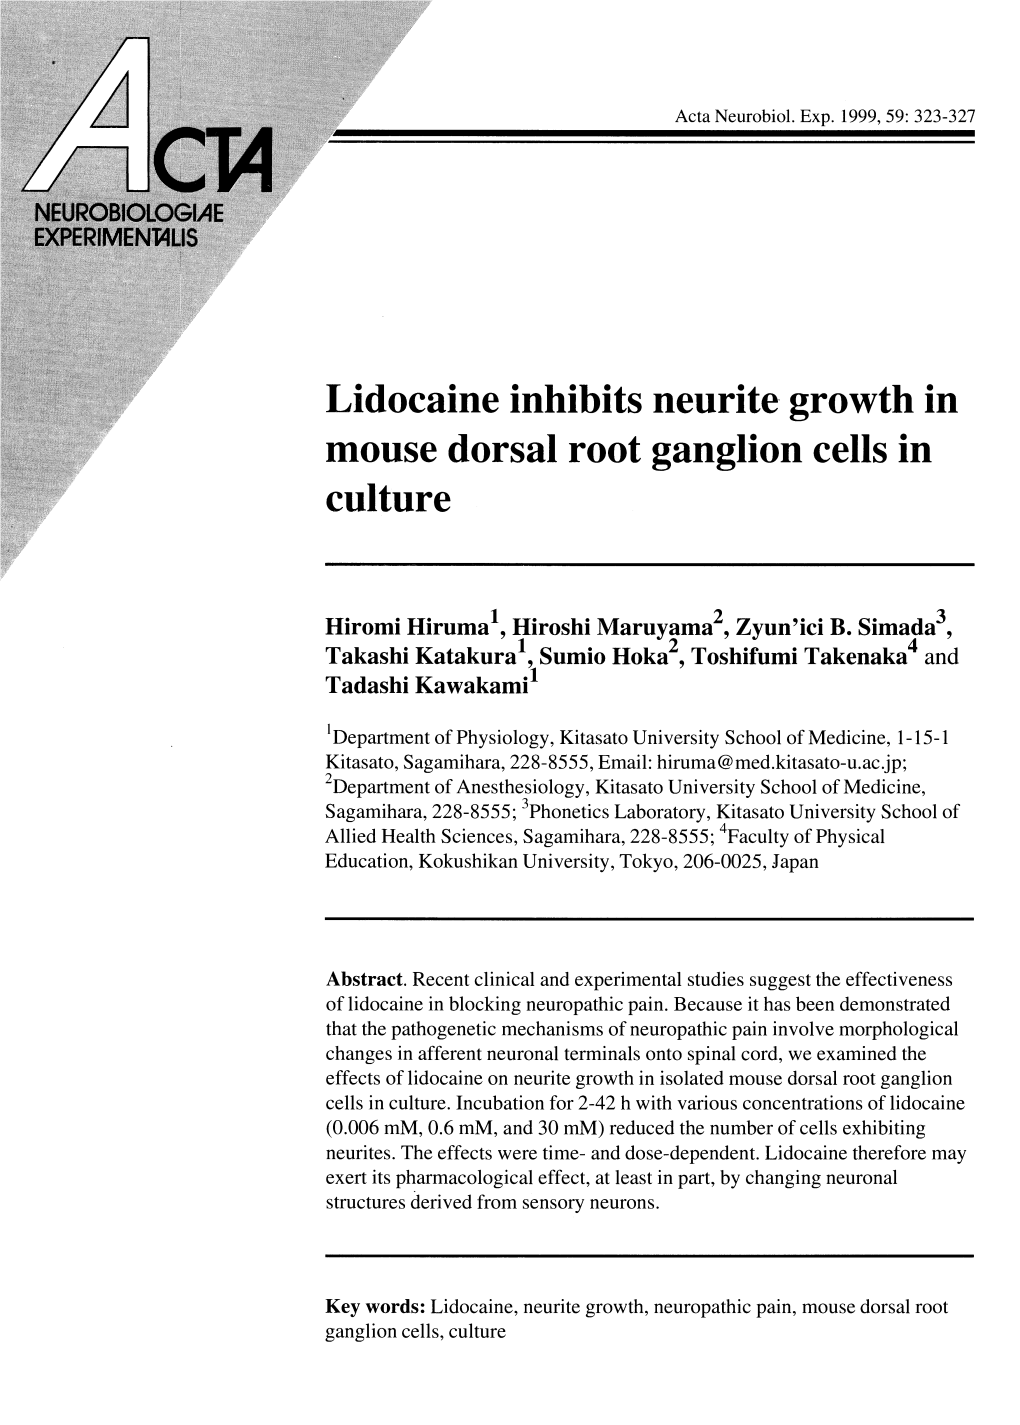 Lidocaine Inhibits Neurite Growth in Mouse Dorsal Root Ganglion Cells in Culture